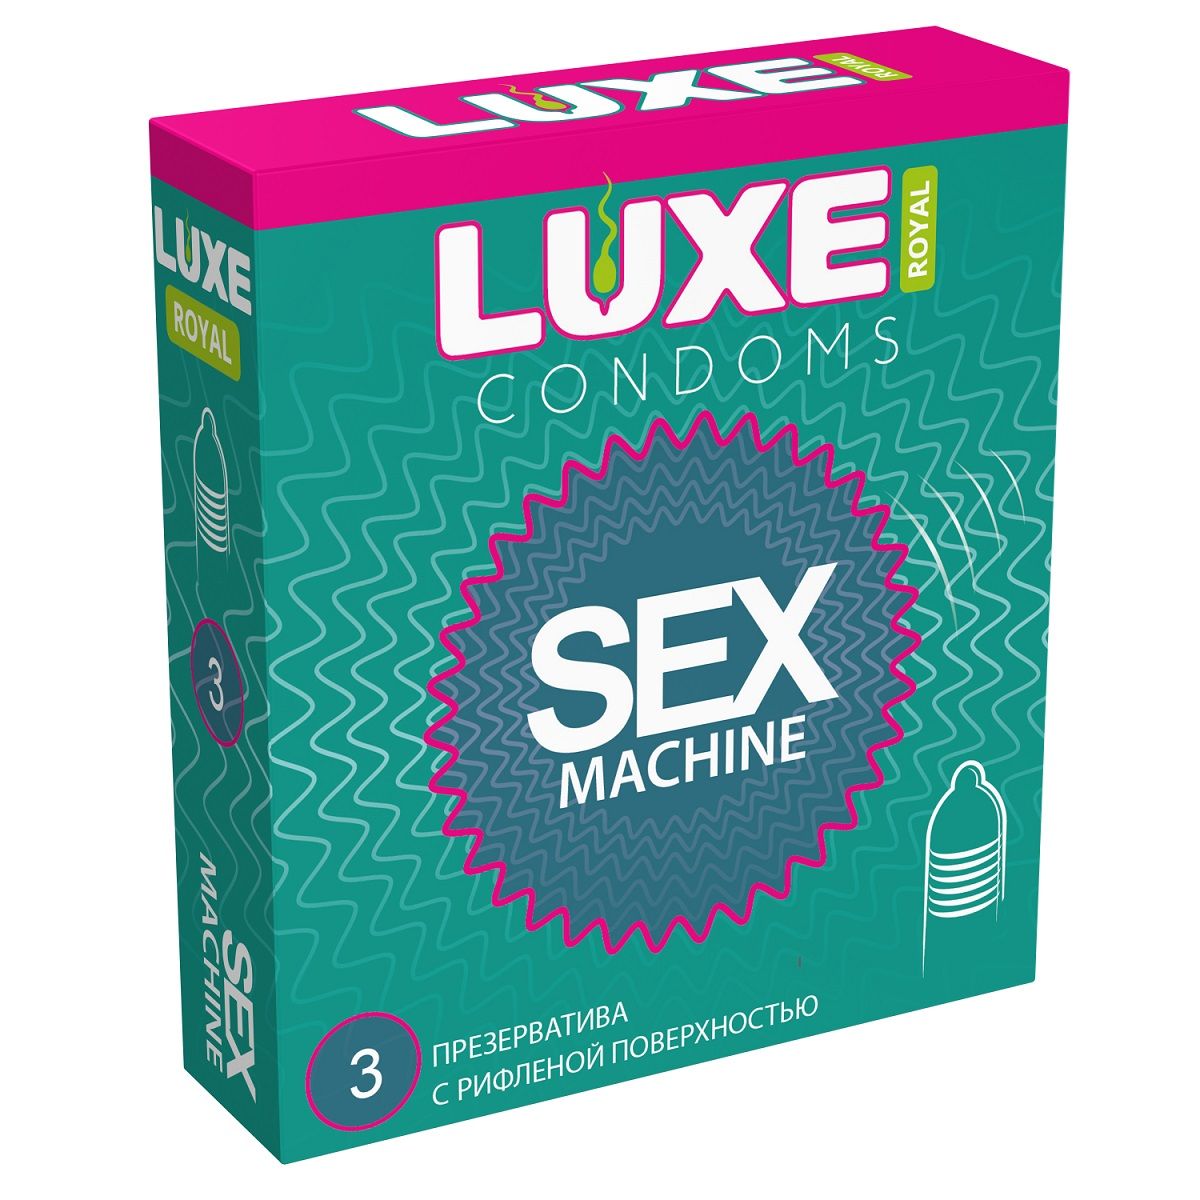   LUXE Royal Sex Machine - 3 .